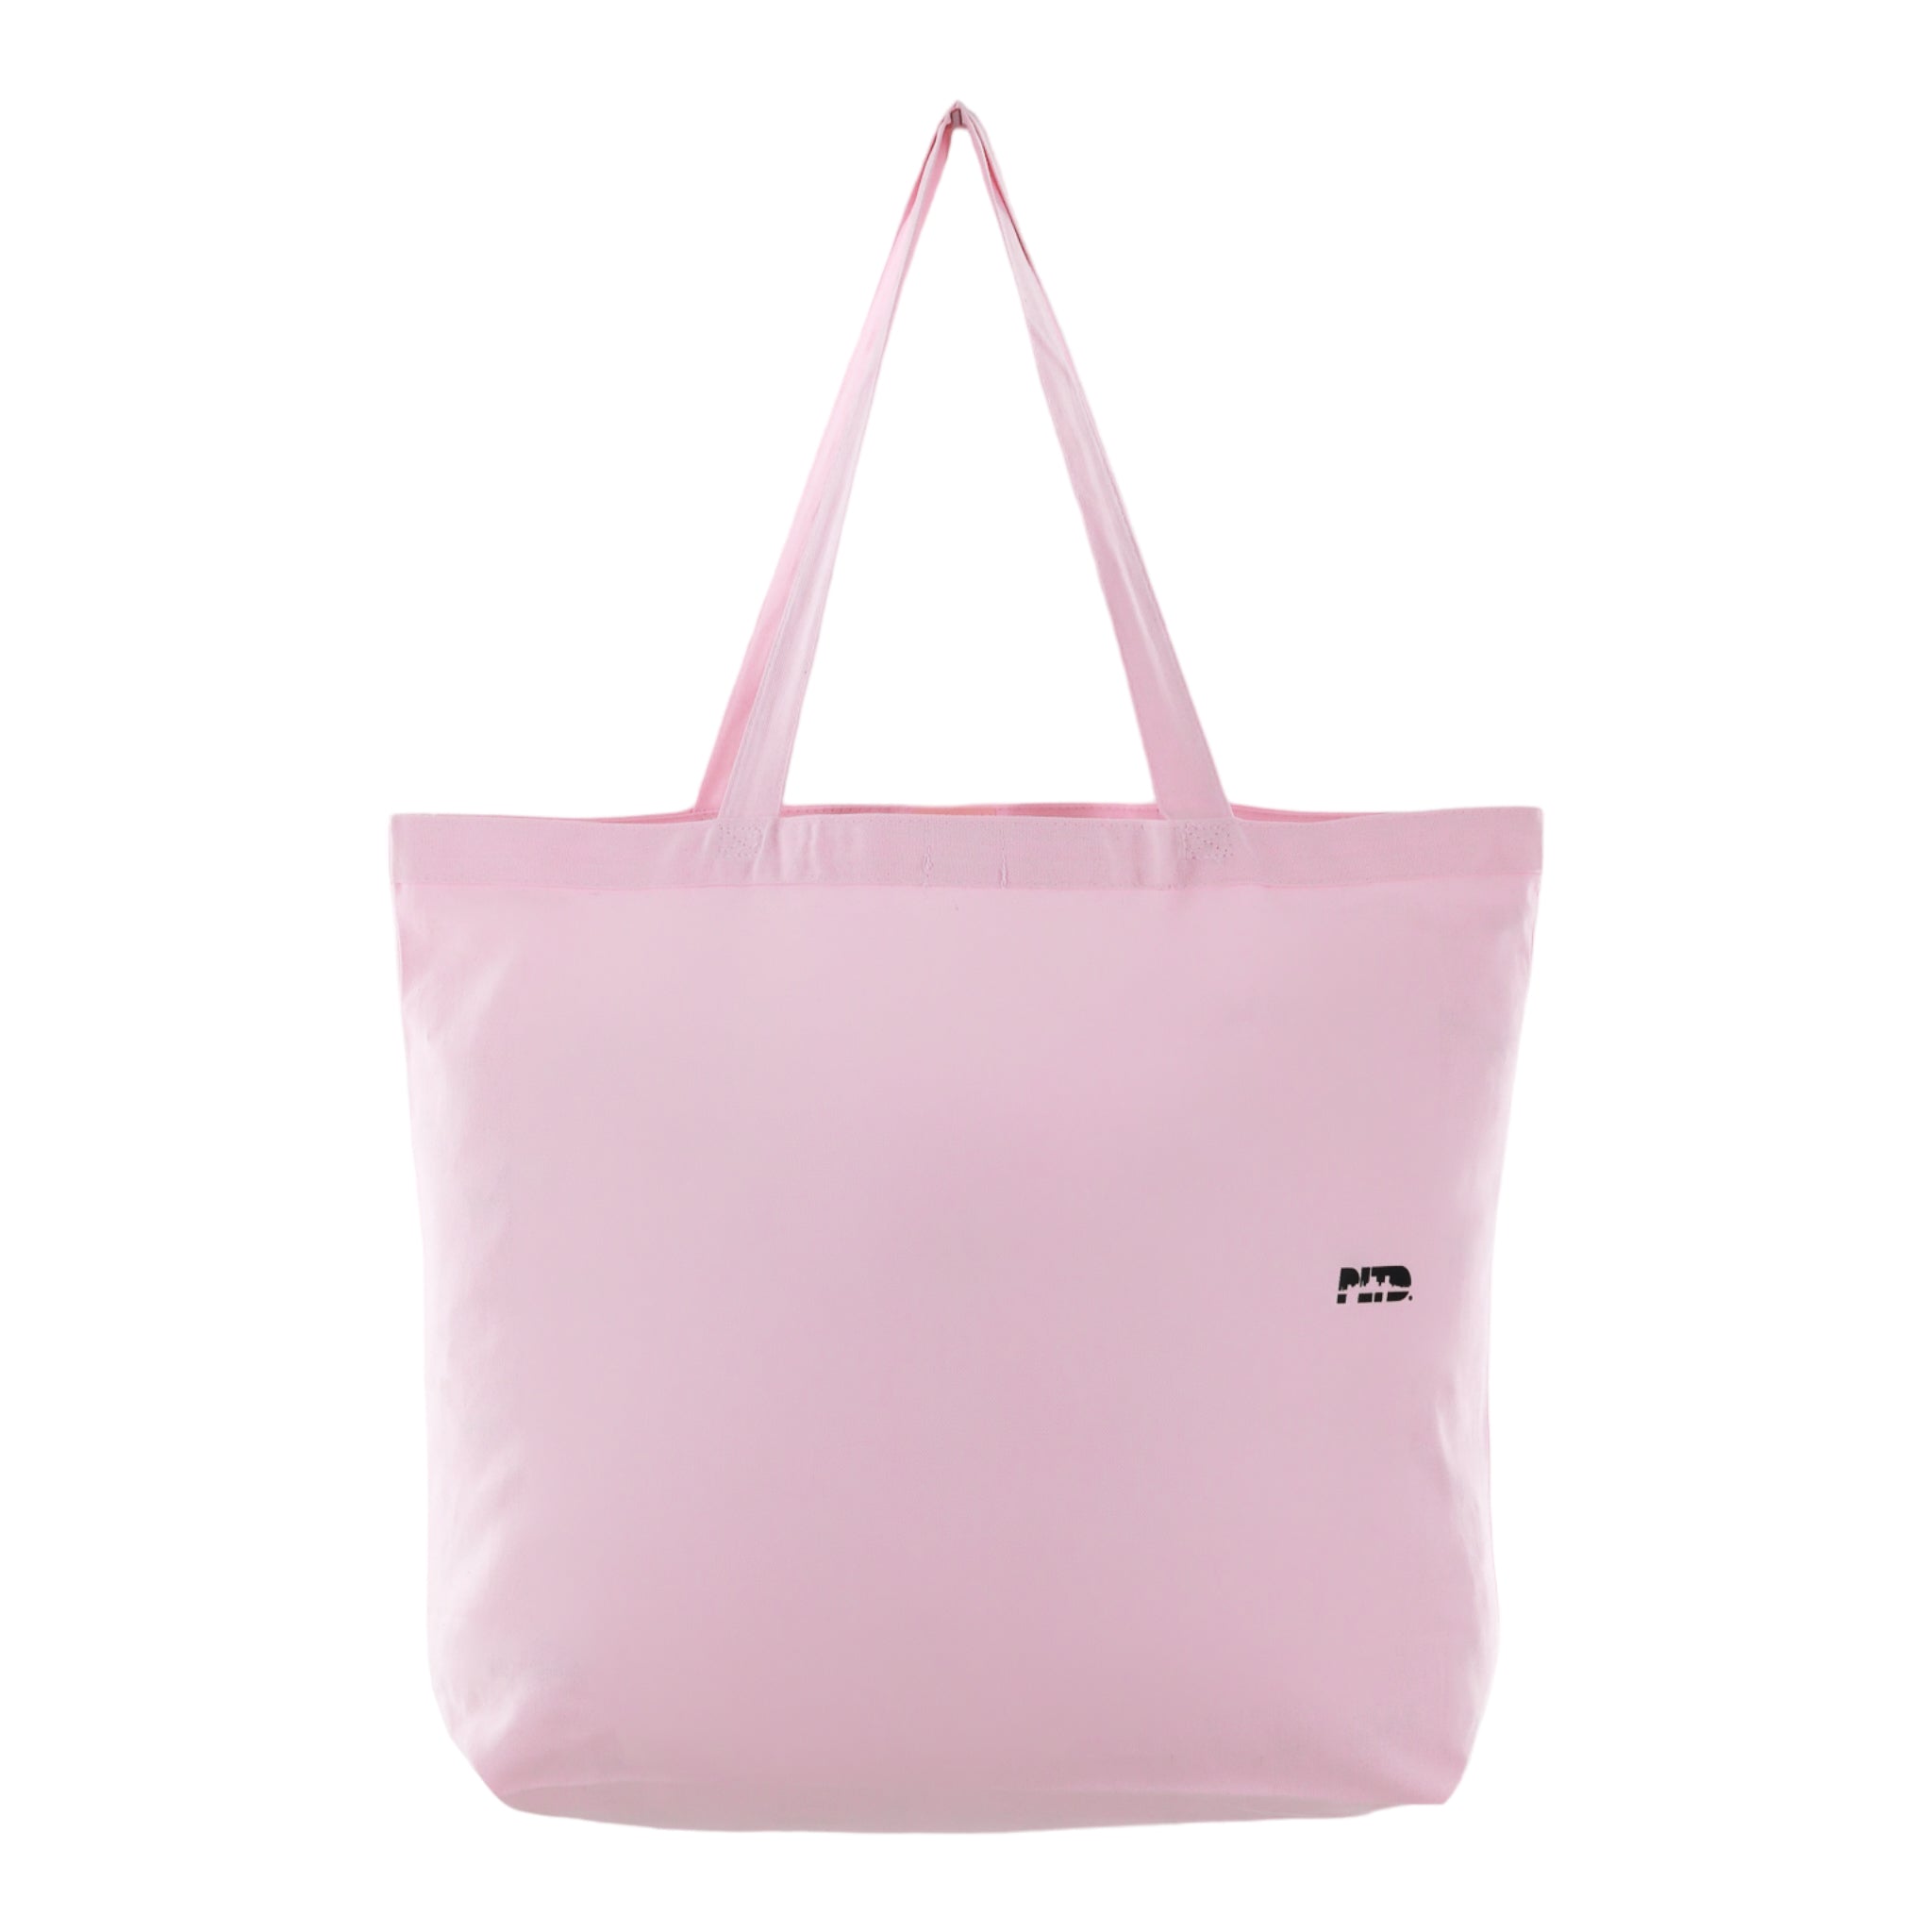 Stay Out of Uptown - Soft Pink Canvas Tote Bag